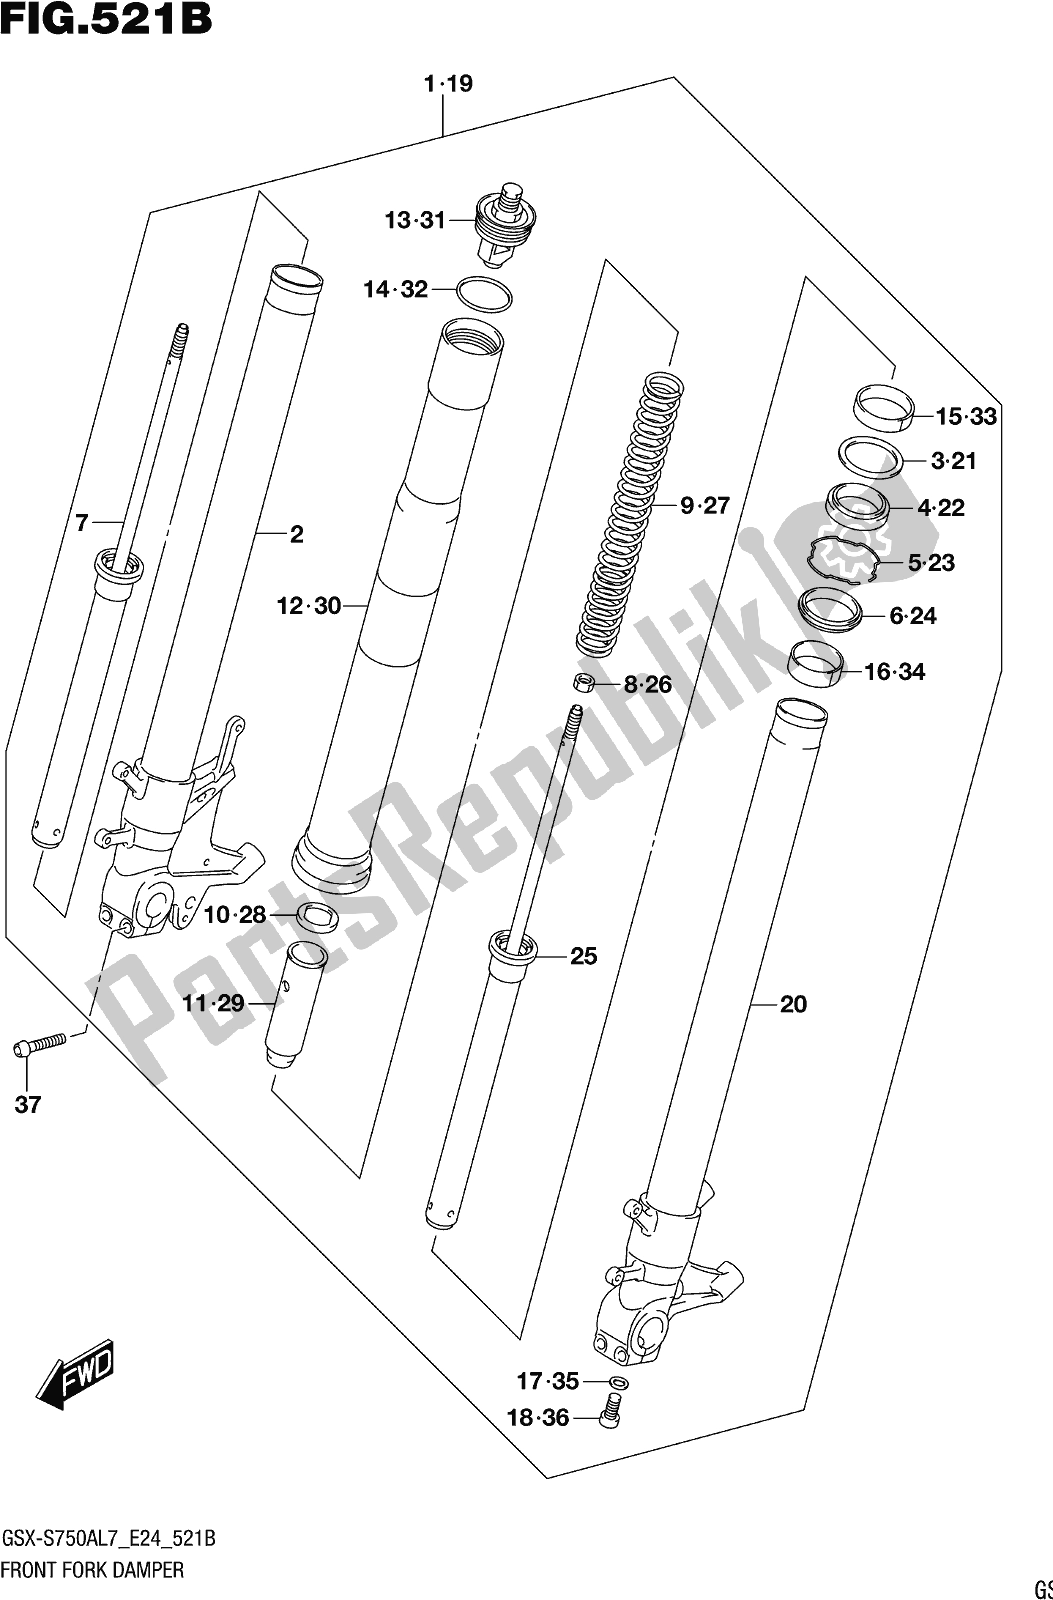 All parts for the Fig. 521b Front Fork Damper (gsx-s750azl7 E24) of the Suzuki Gsx-s 750 AZ 2017